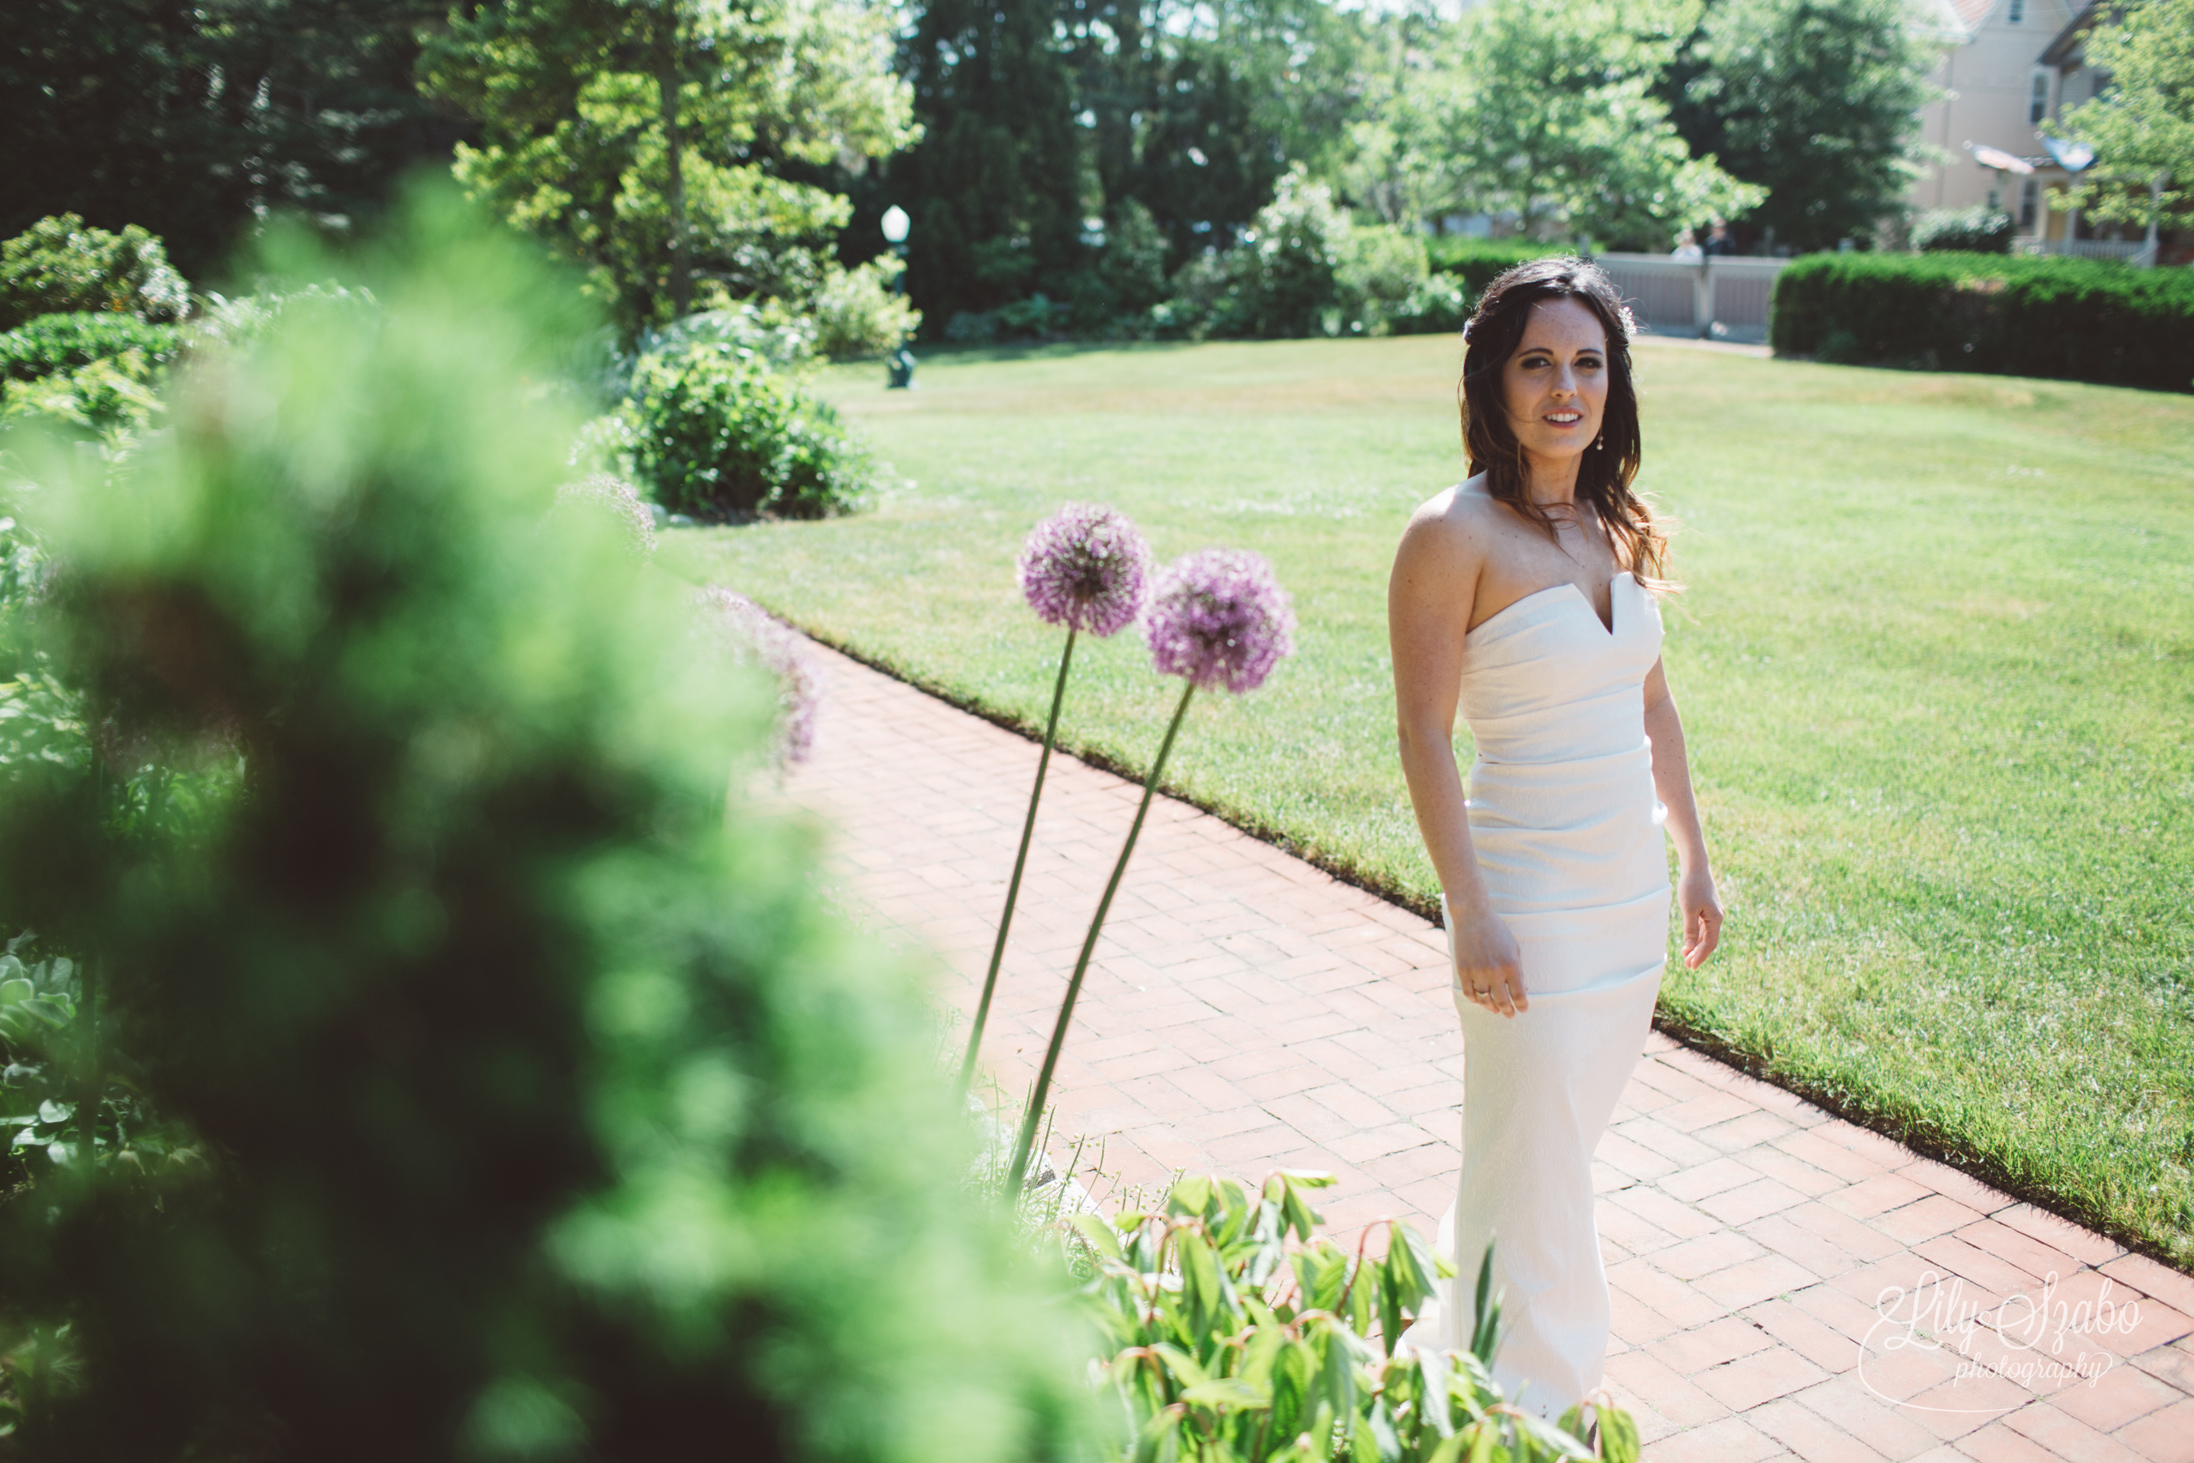 Southern Mansion Wedding in Cape May, NJ